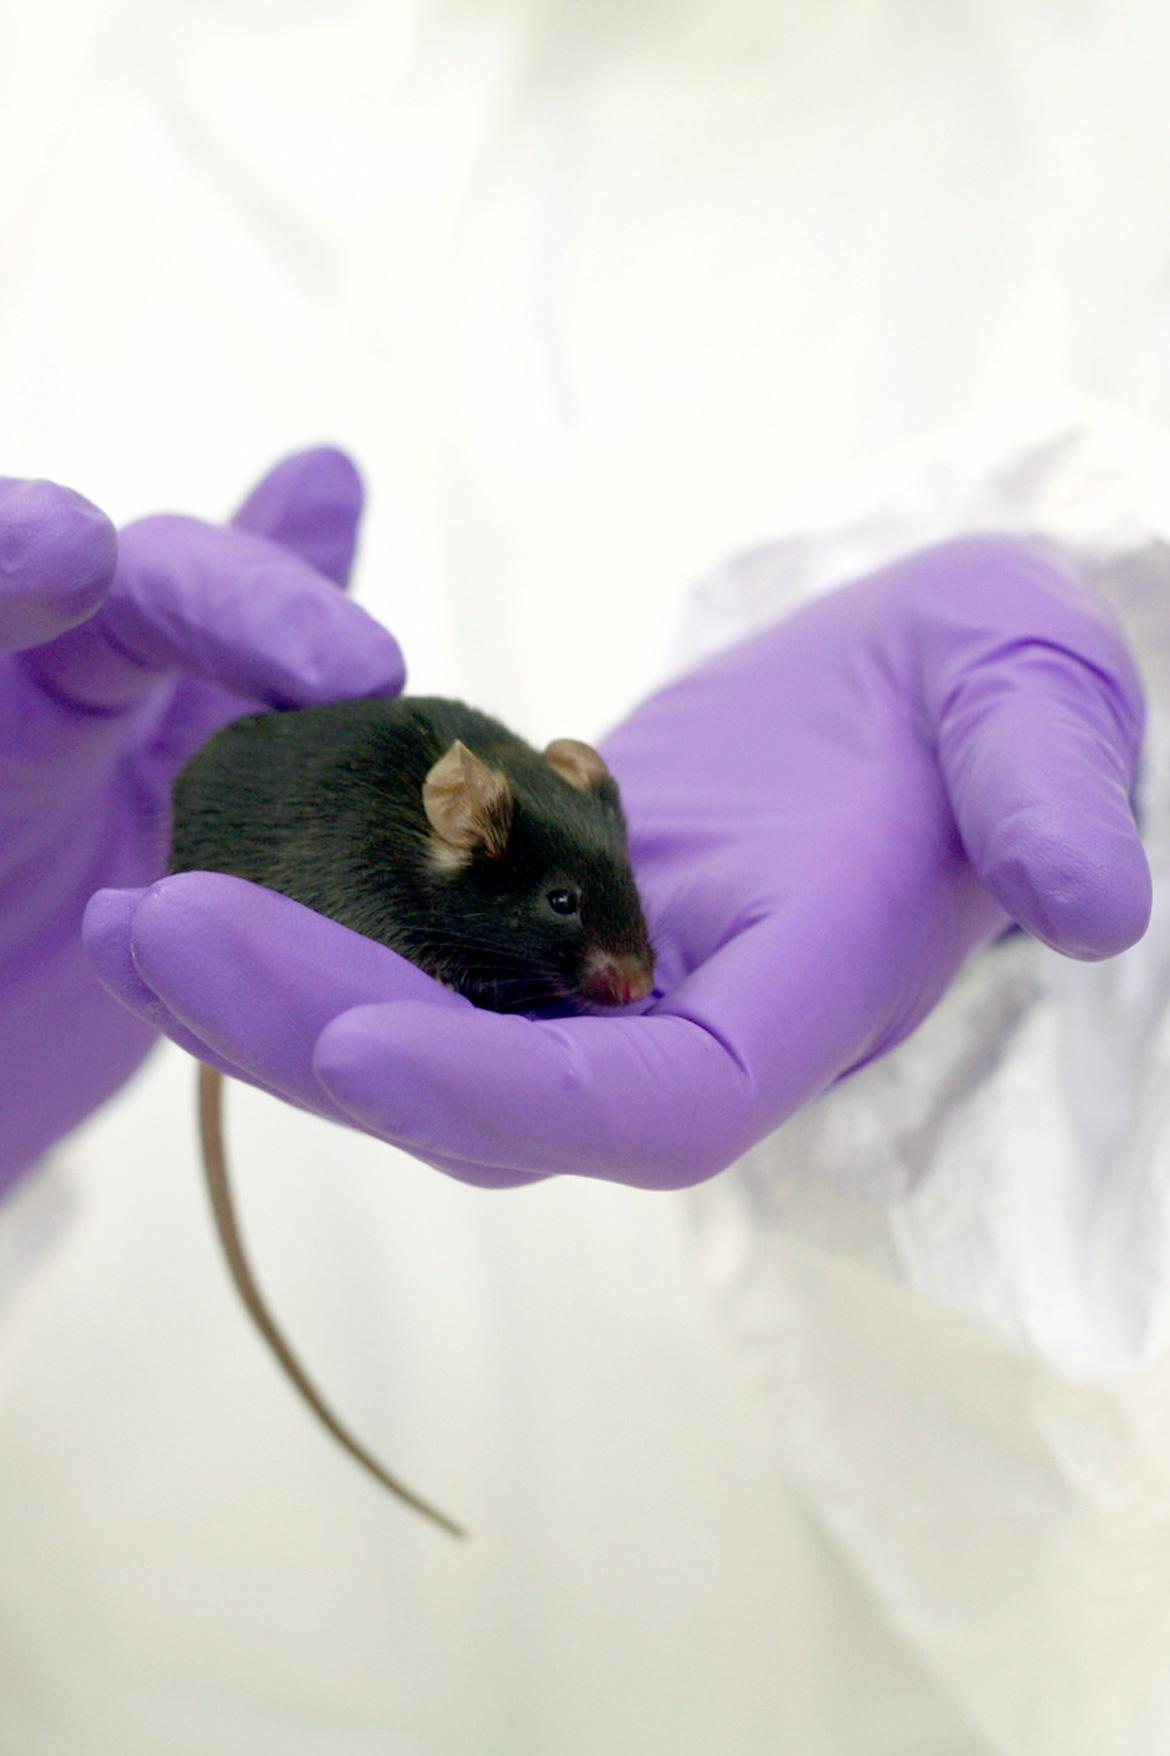 Black mouse gloved hands Credit: Understanding Animal Research